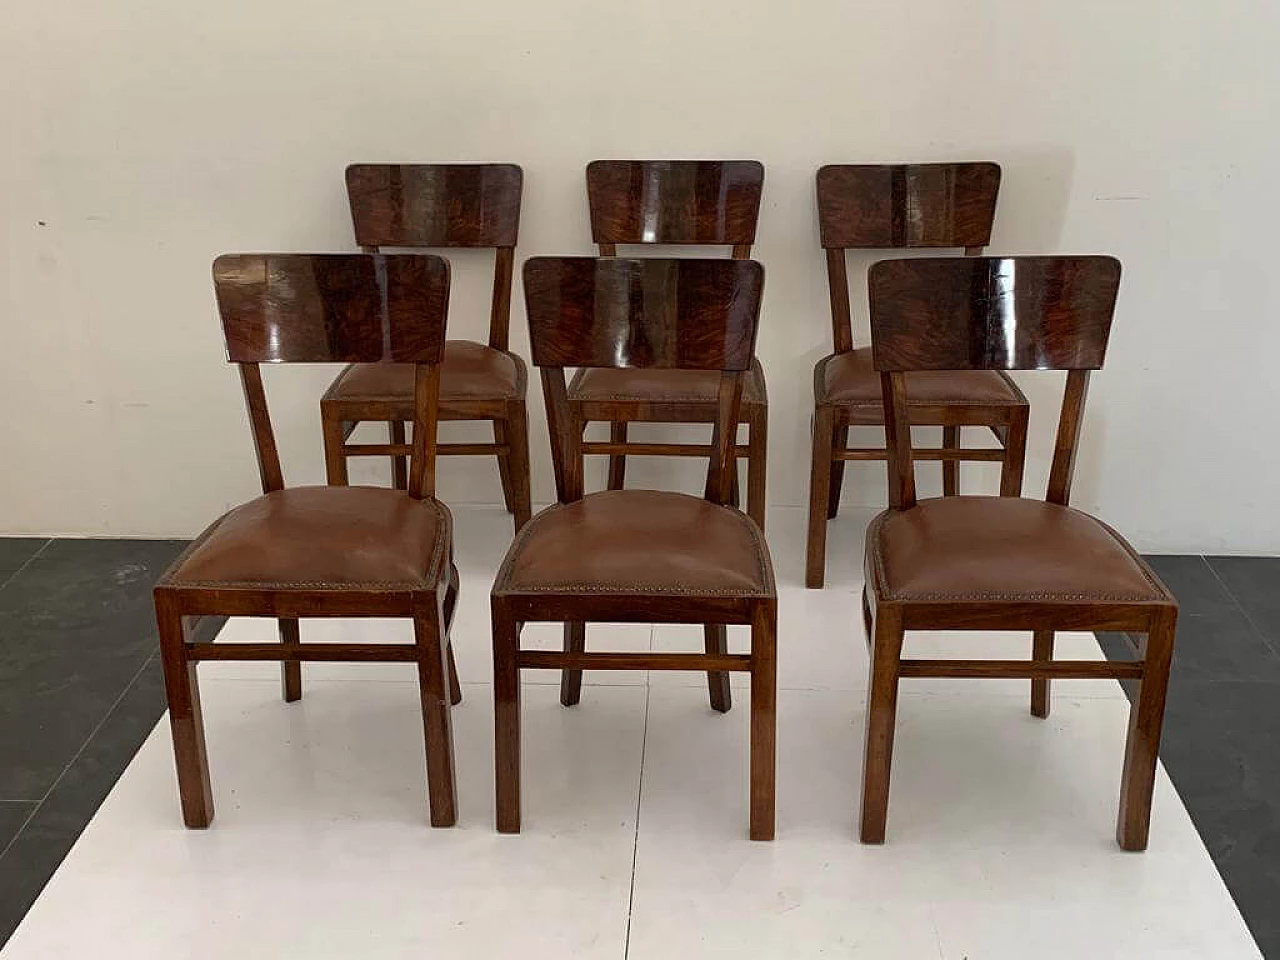 6 Art Deco walnut-root chairs with leather seats, 1940s 1